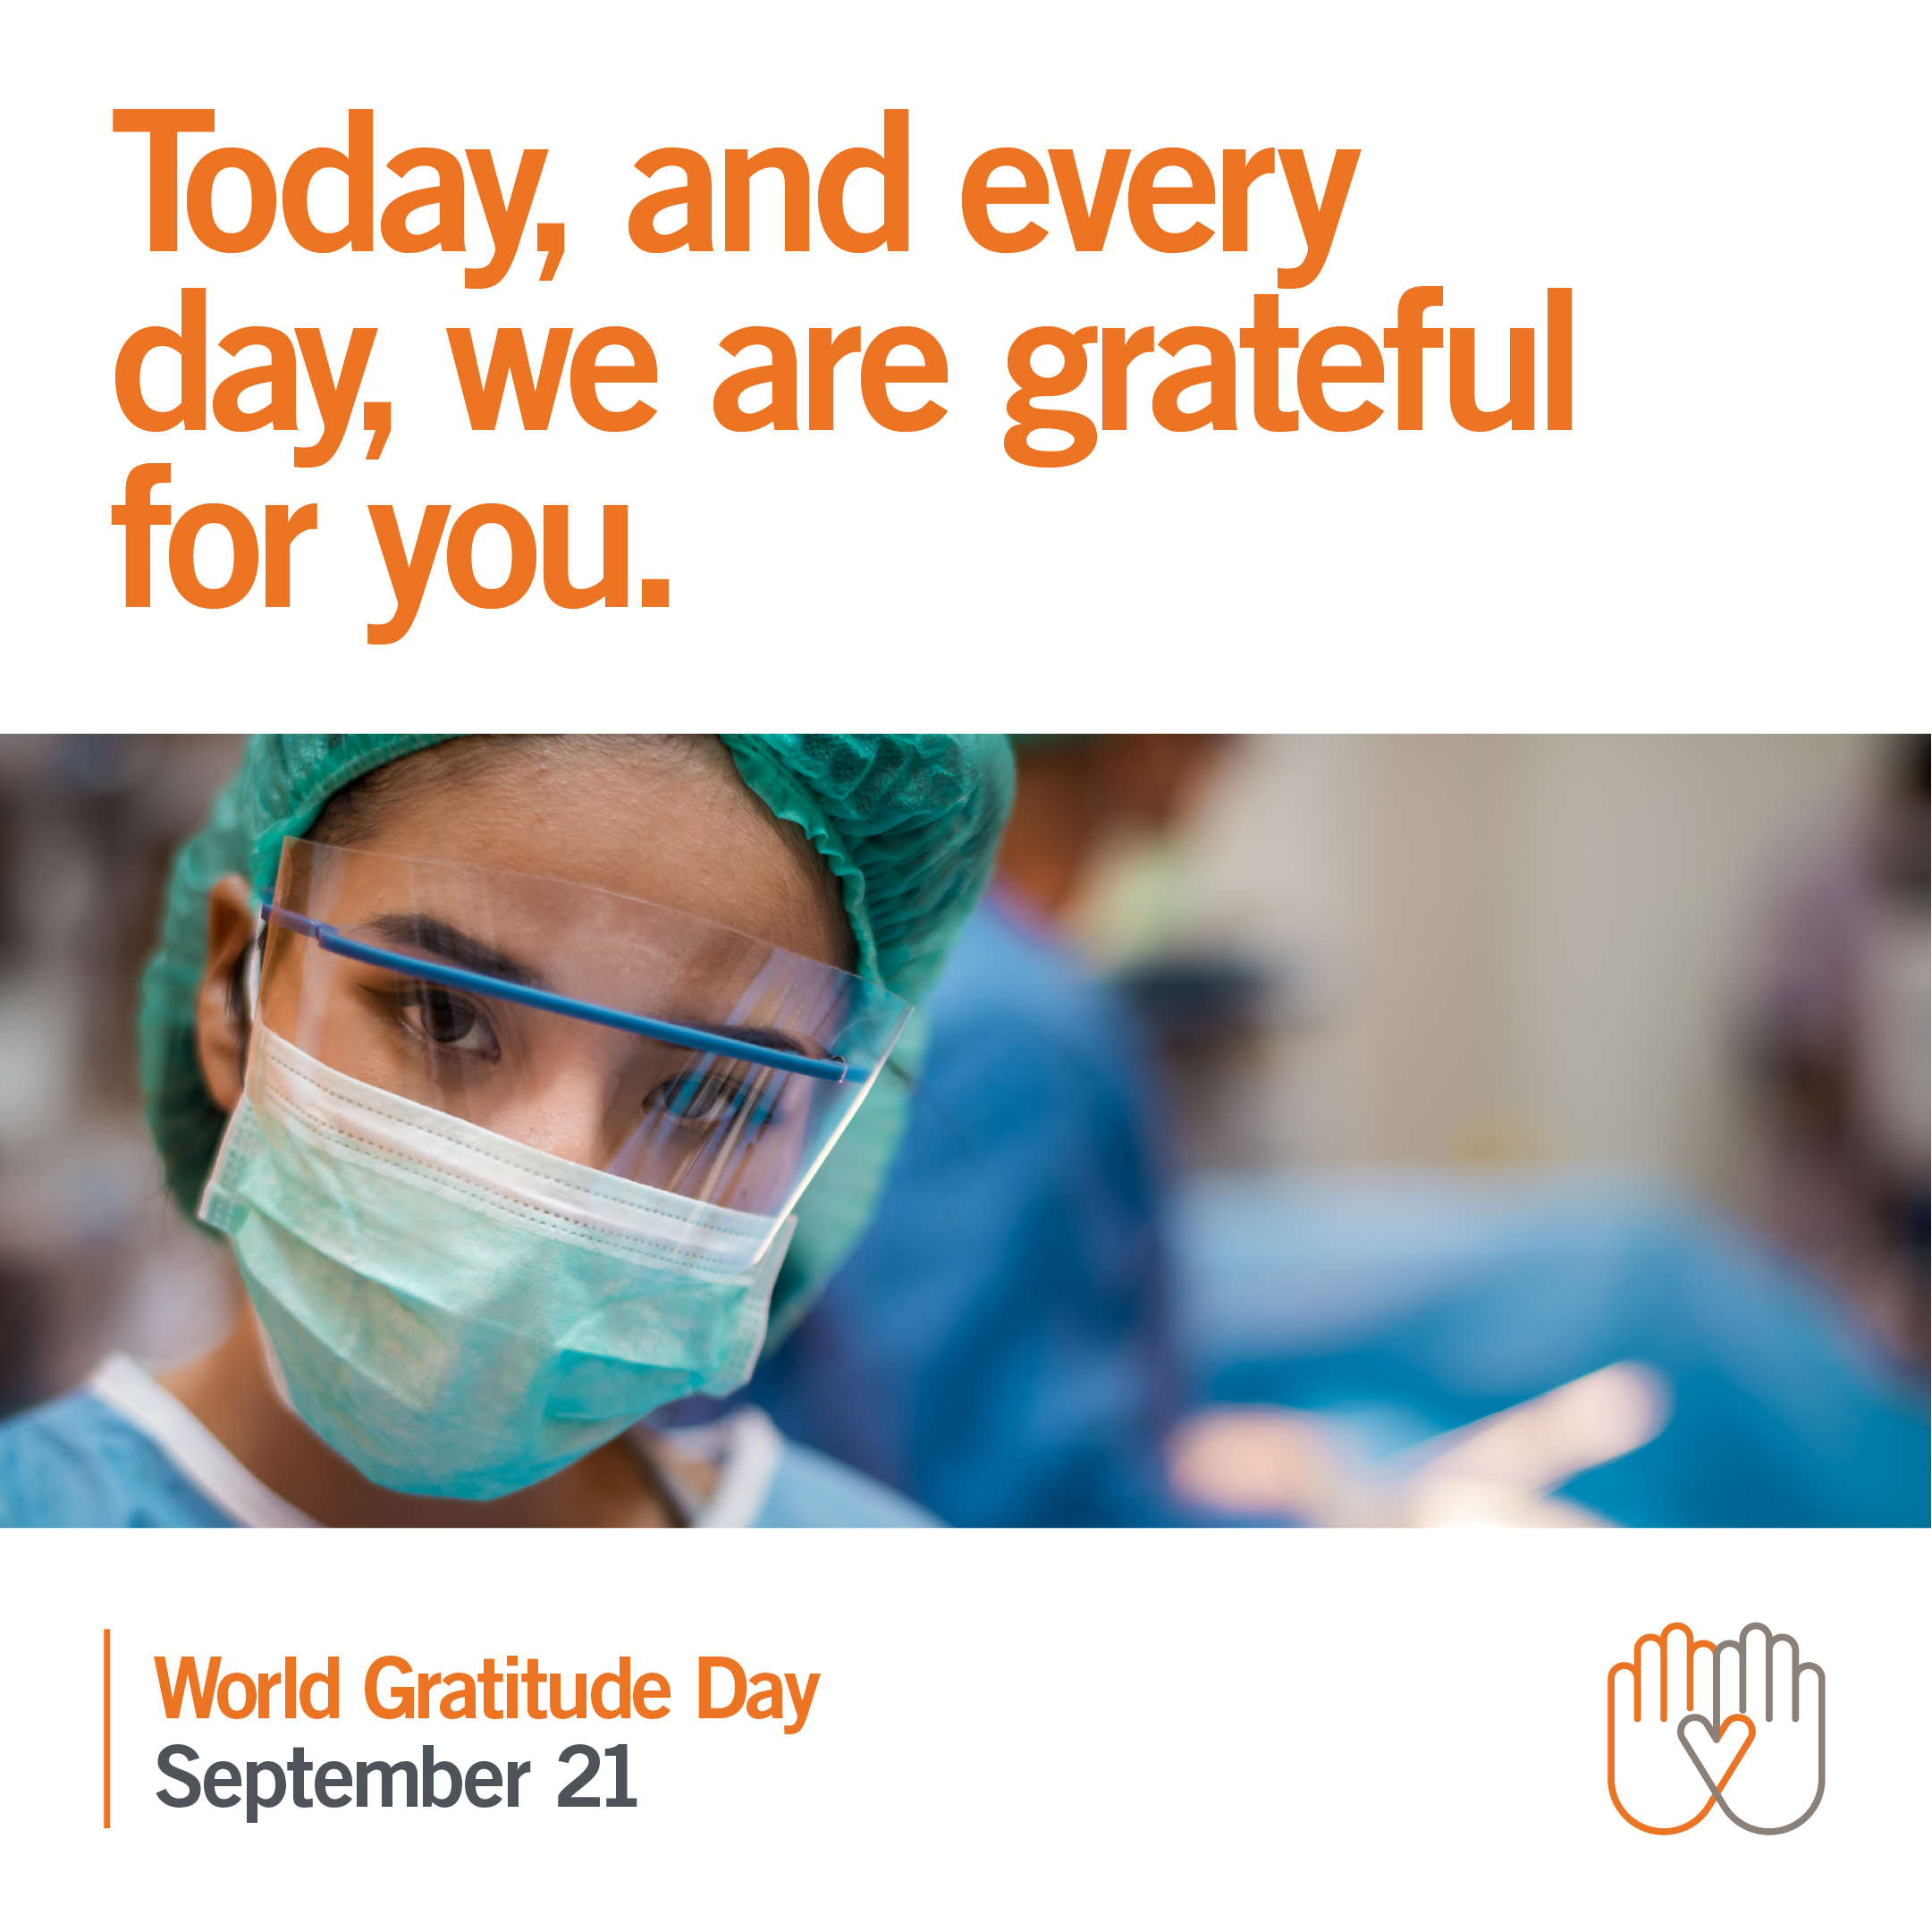 Female medical provider with text, "Today and every day, we are grateful for you."